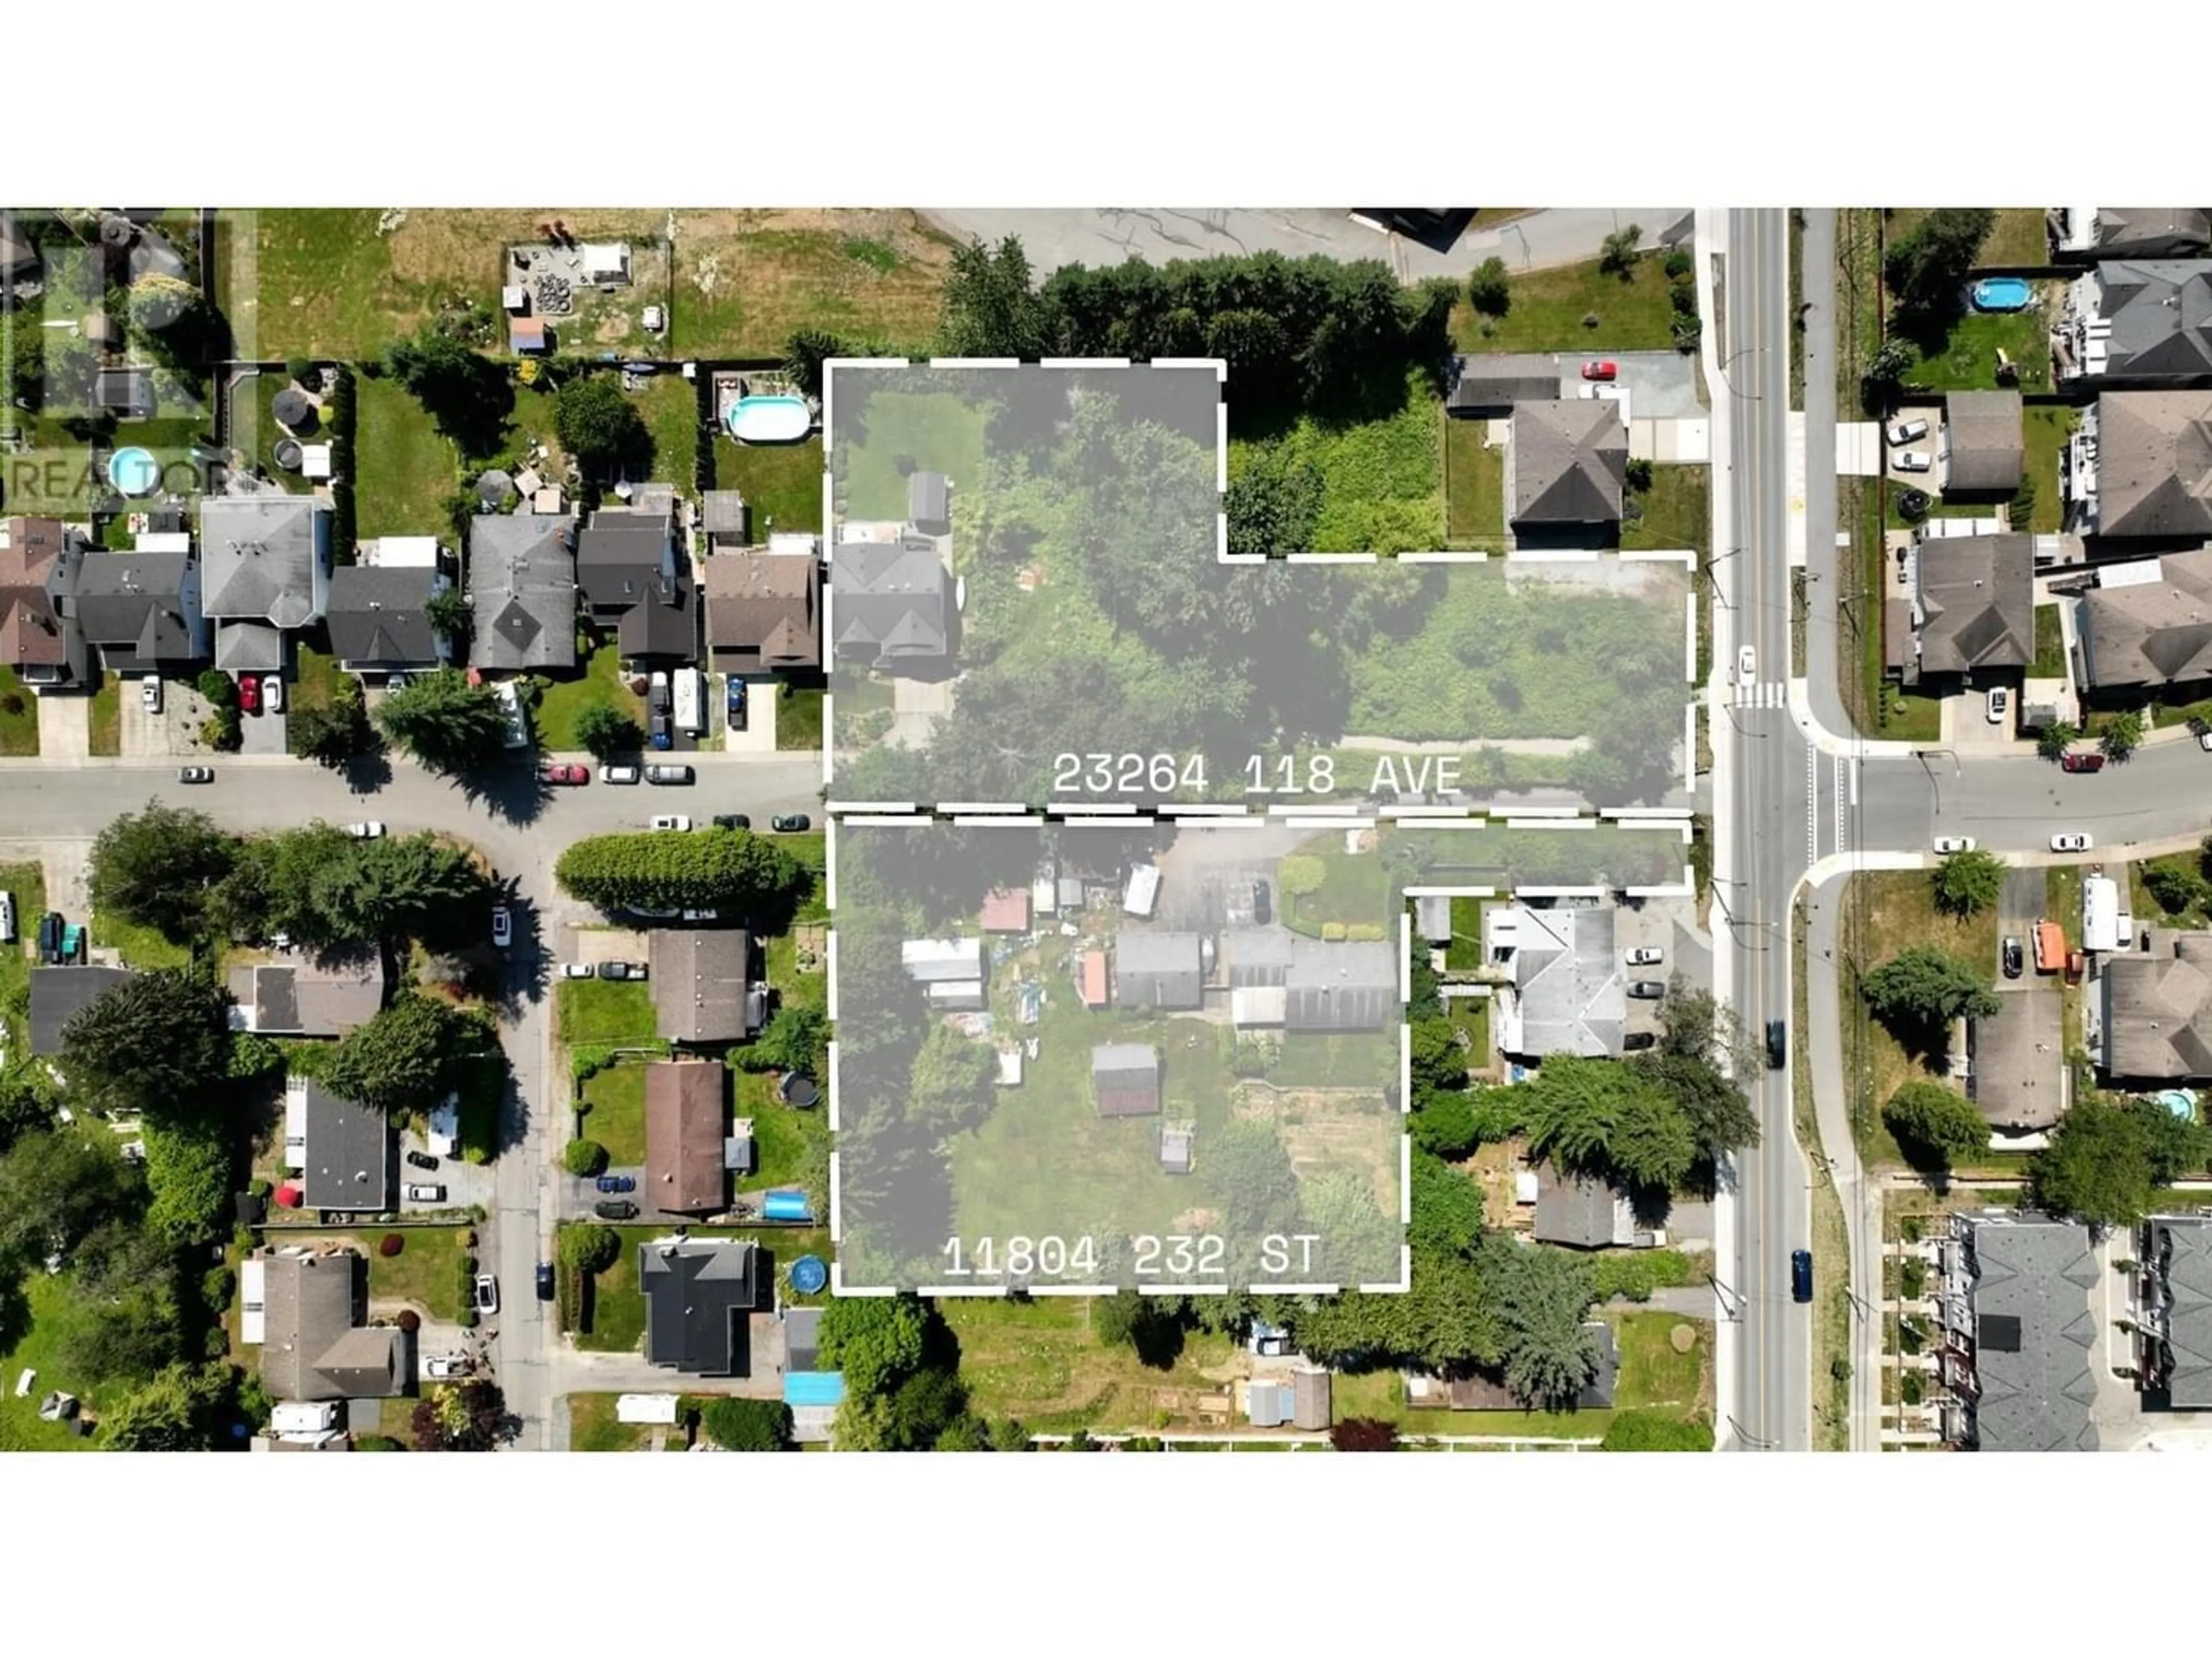 Picture of a map for 23264 118 AVENUE, Maple Ridge British Columbia V2X9J1